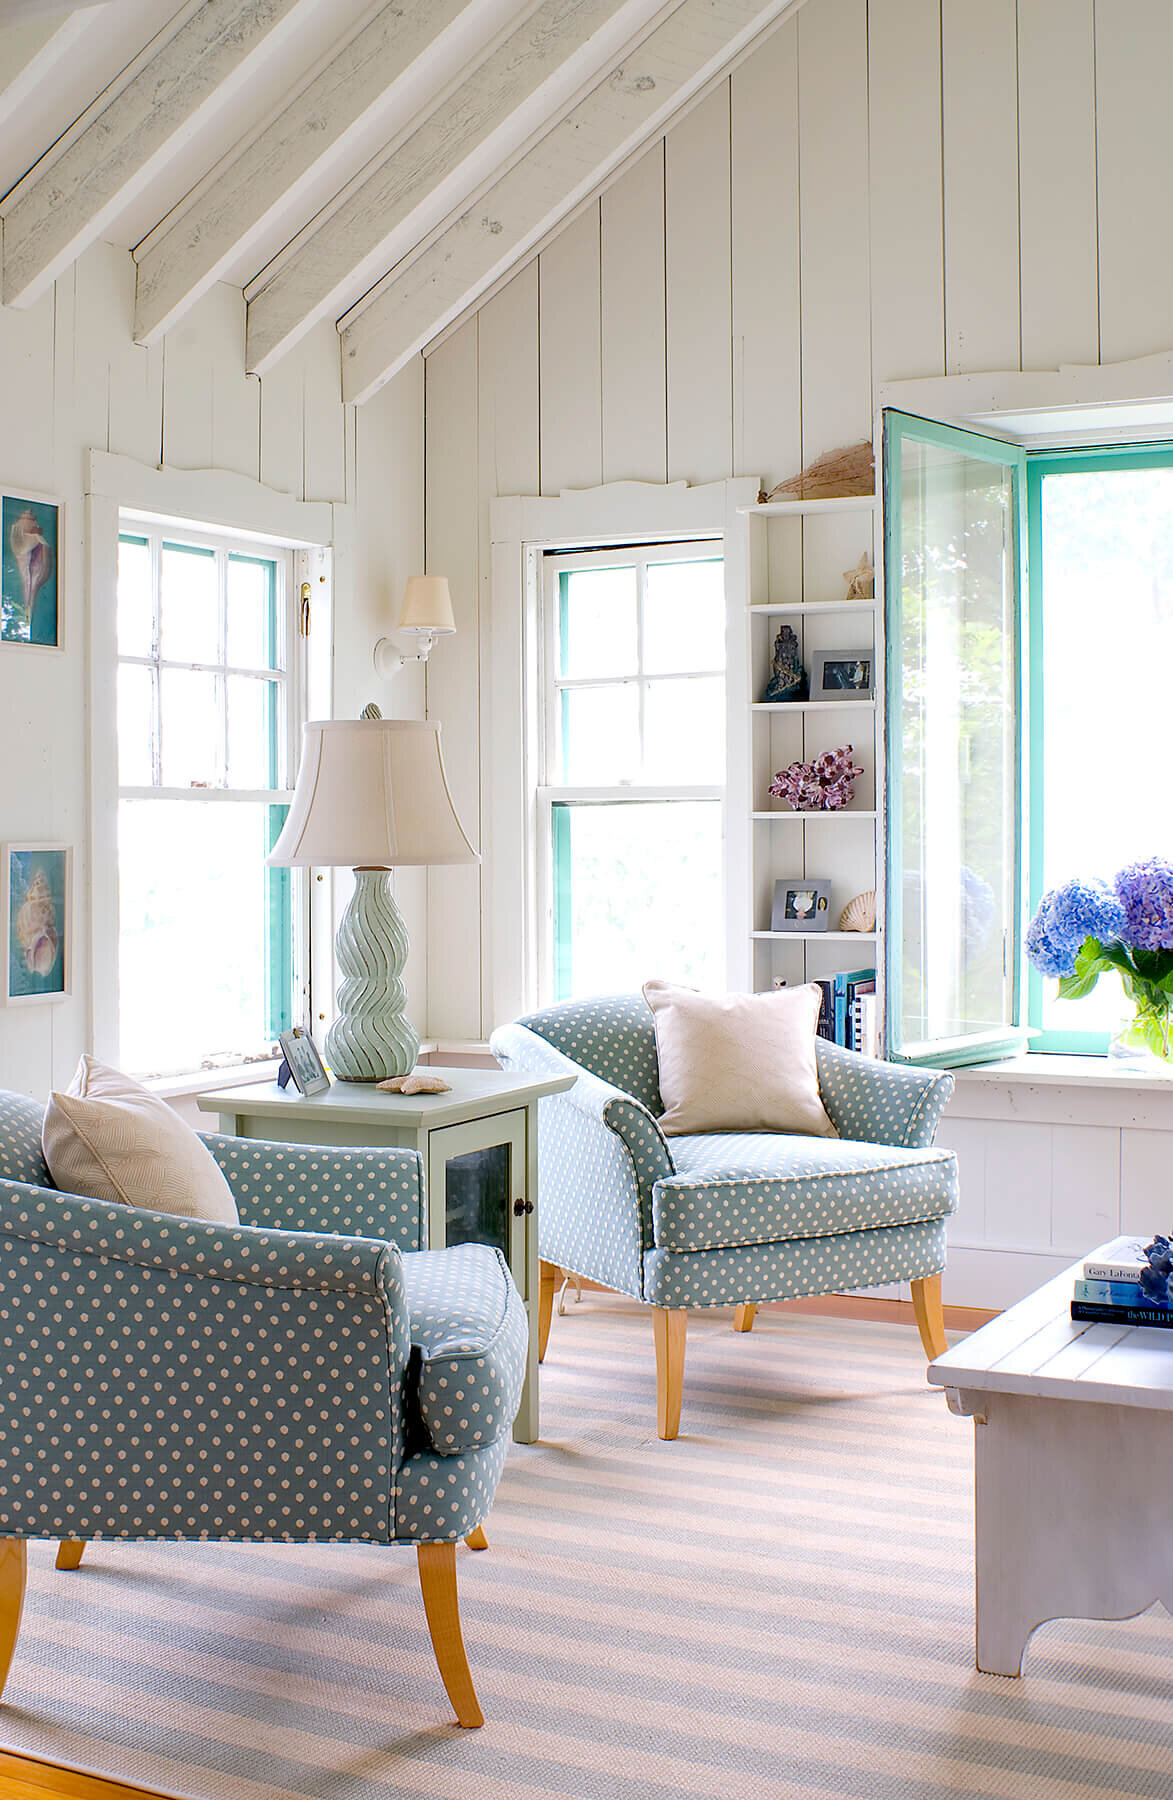 Coastal interior living room in blue and white.